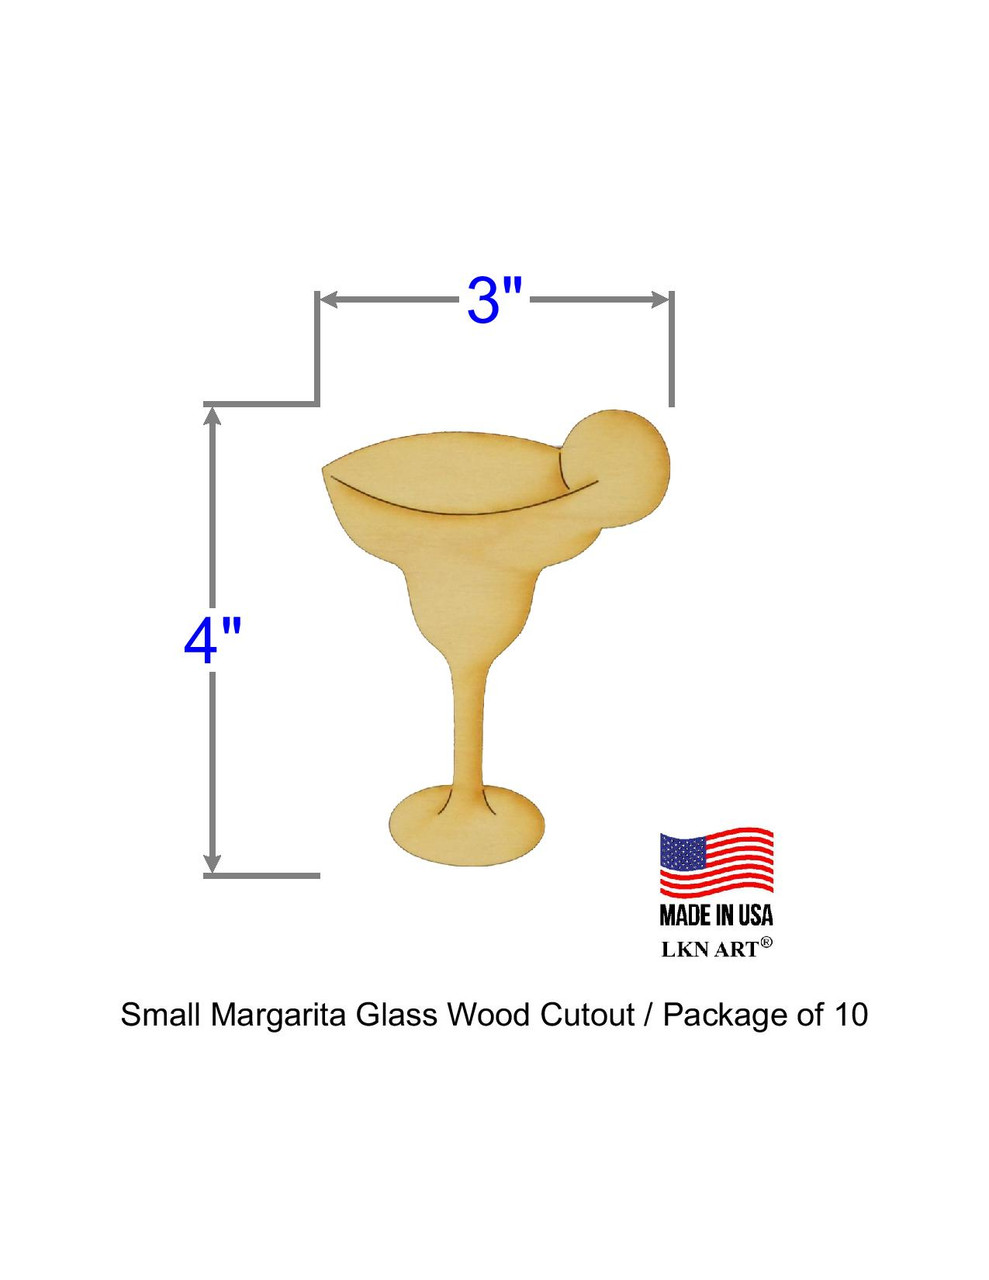 https://cdn11.bigcommerce.com/s-m28of/images/stencil/1280x1280/products/952/6932/Small_Margarita_Glass_Wood_Cutout__65864.1666638361.jpg?c=2